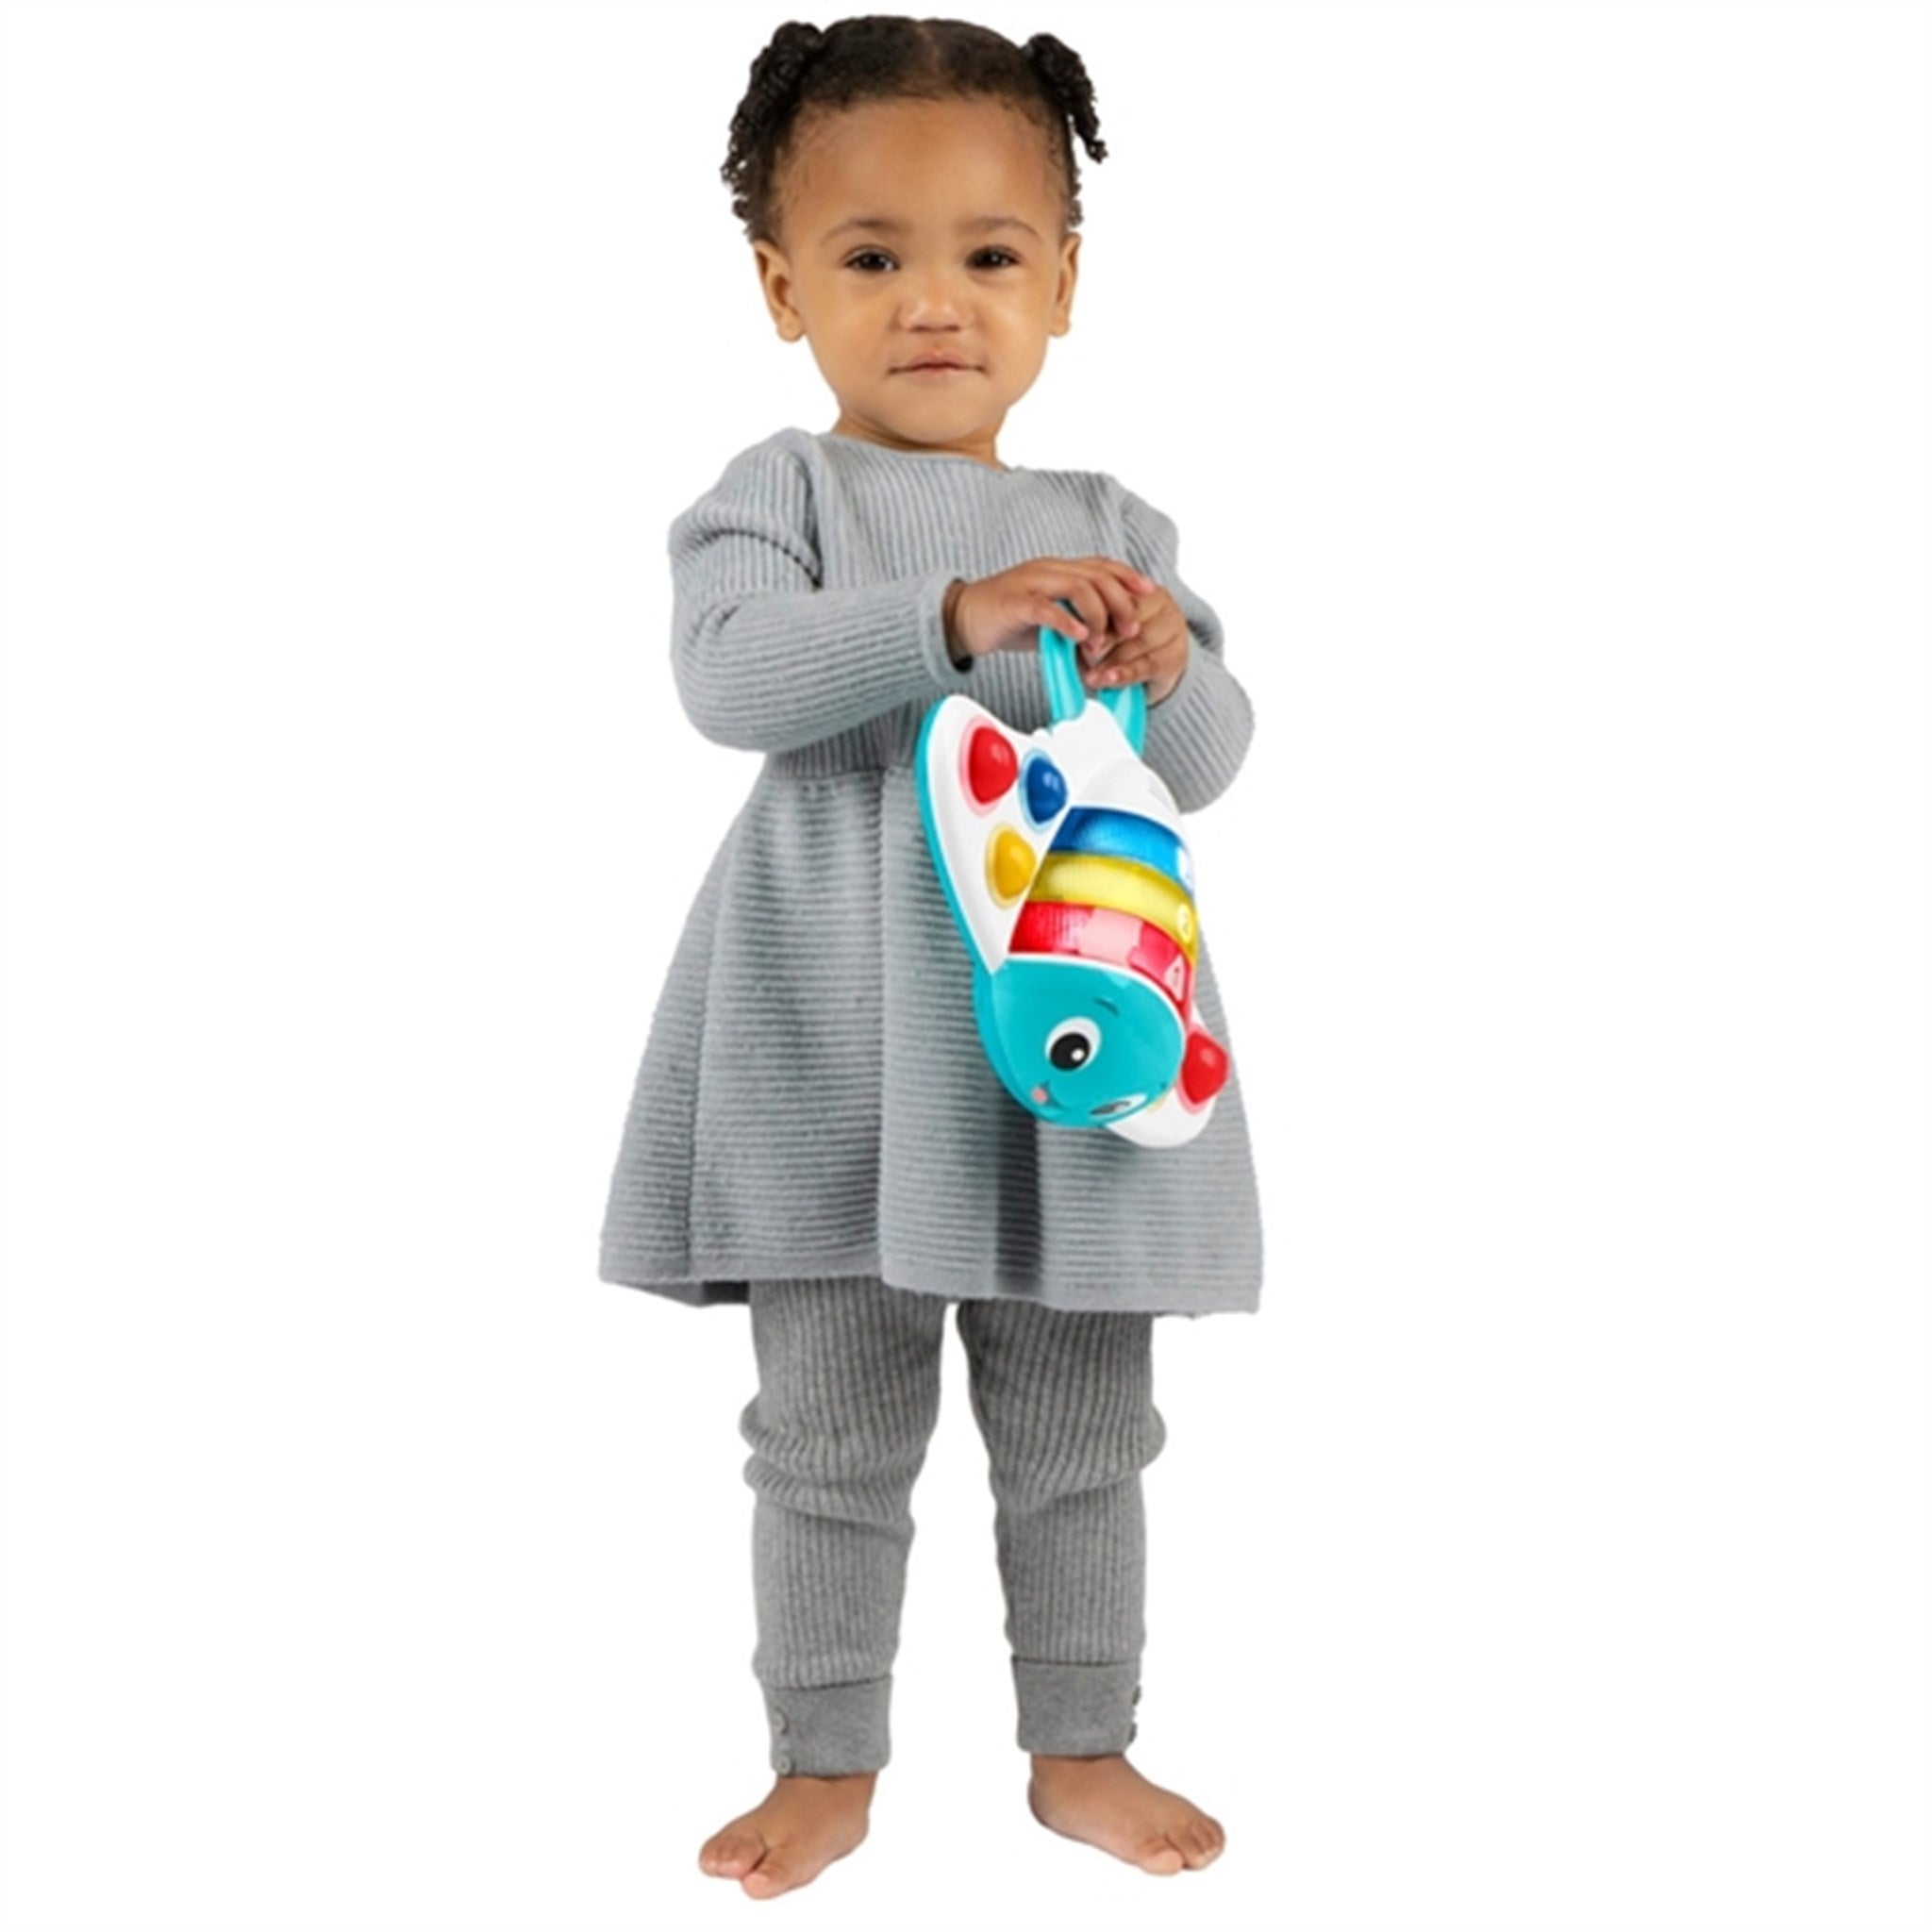 Baby Einstein Legerokke Dimple and Delight 2